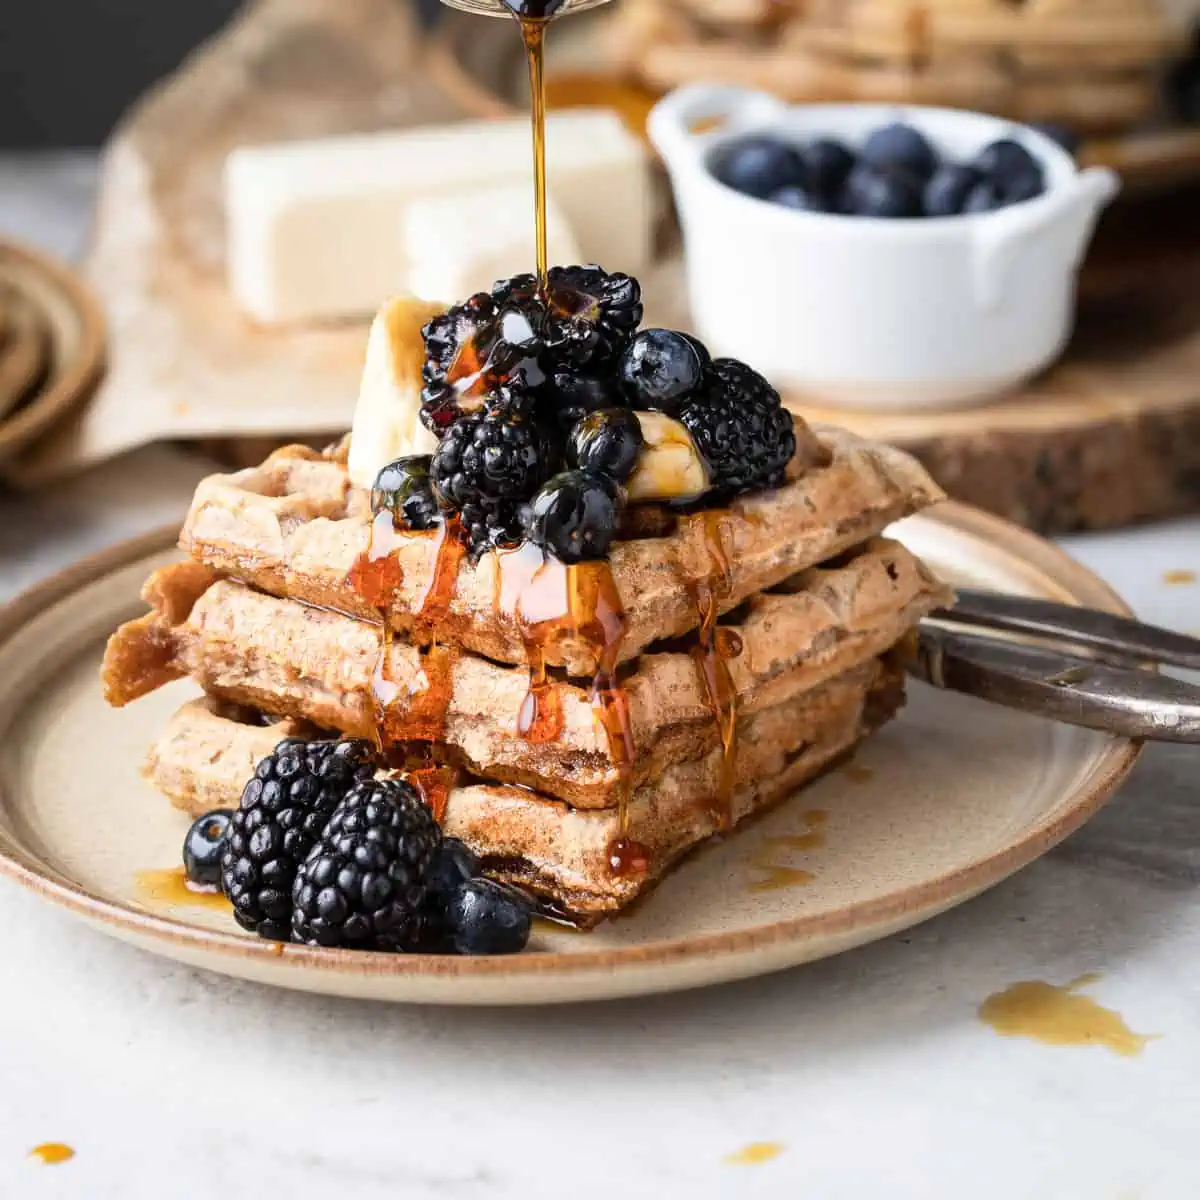 A stack of waffles with maple syrup being drizzled on top. The waffles have fresh fruit on top and is for a recipe post.